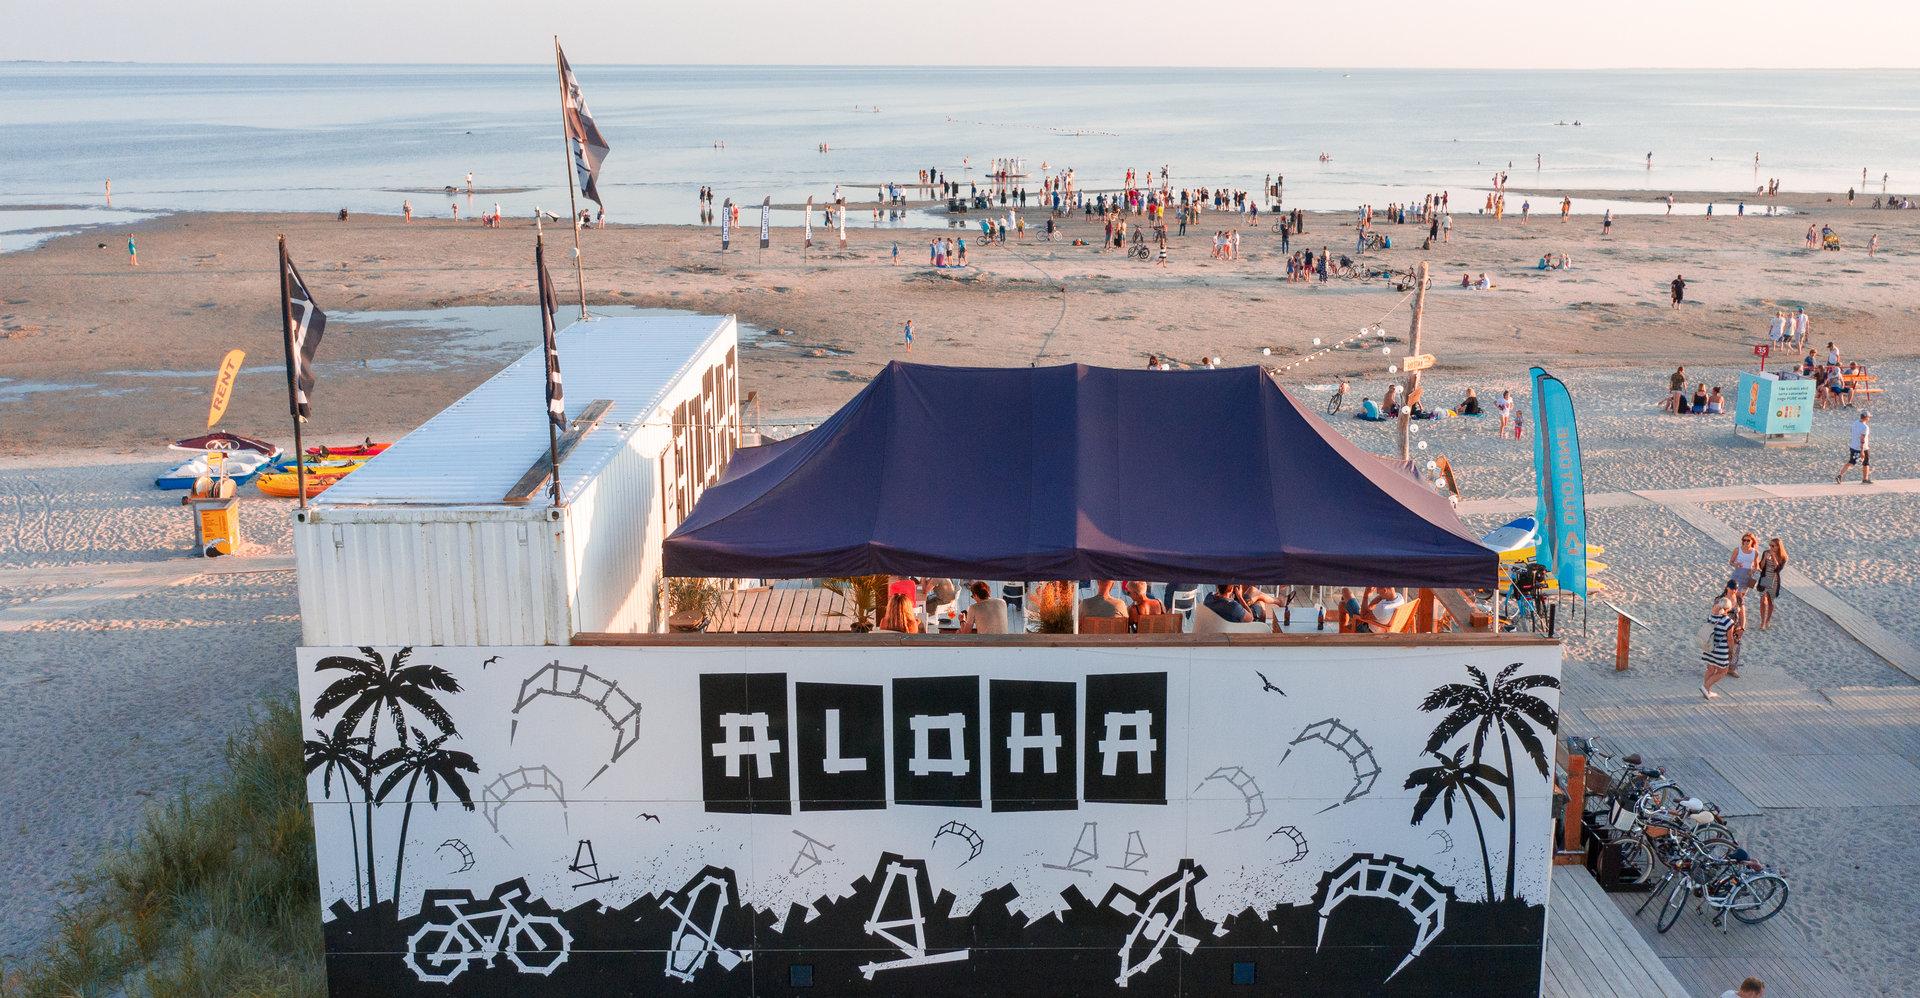 Aloha Surf Centre – a place for organising your event